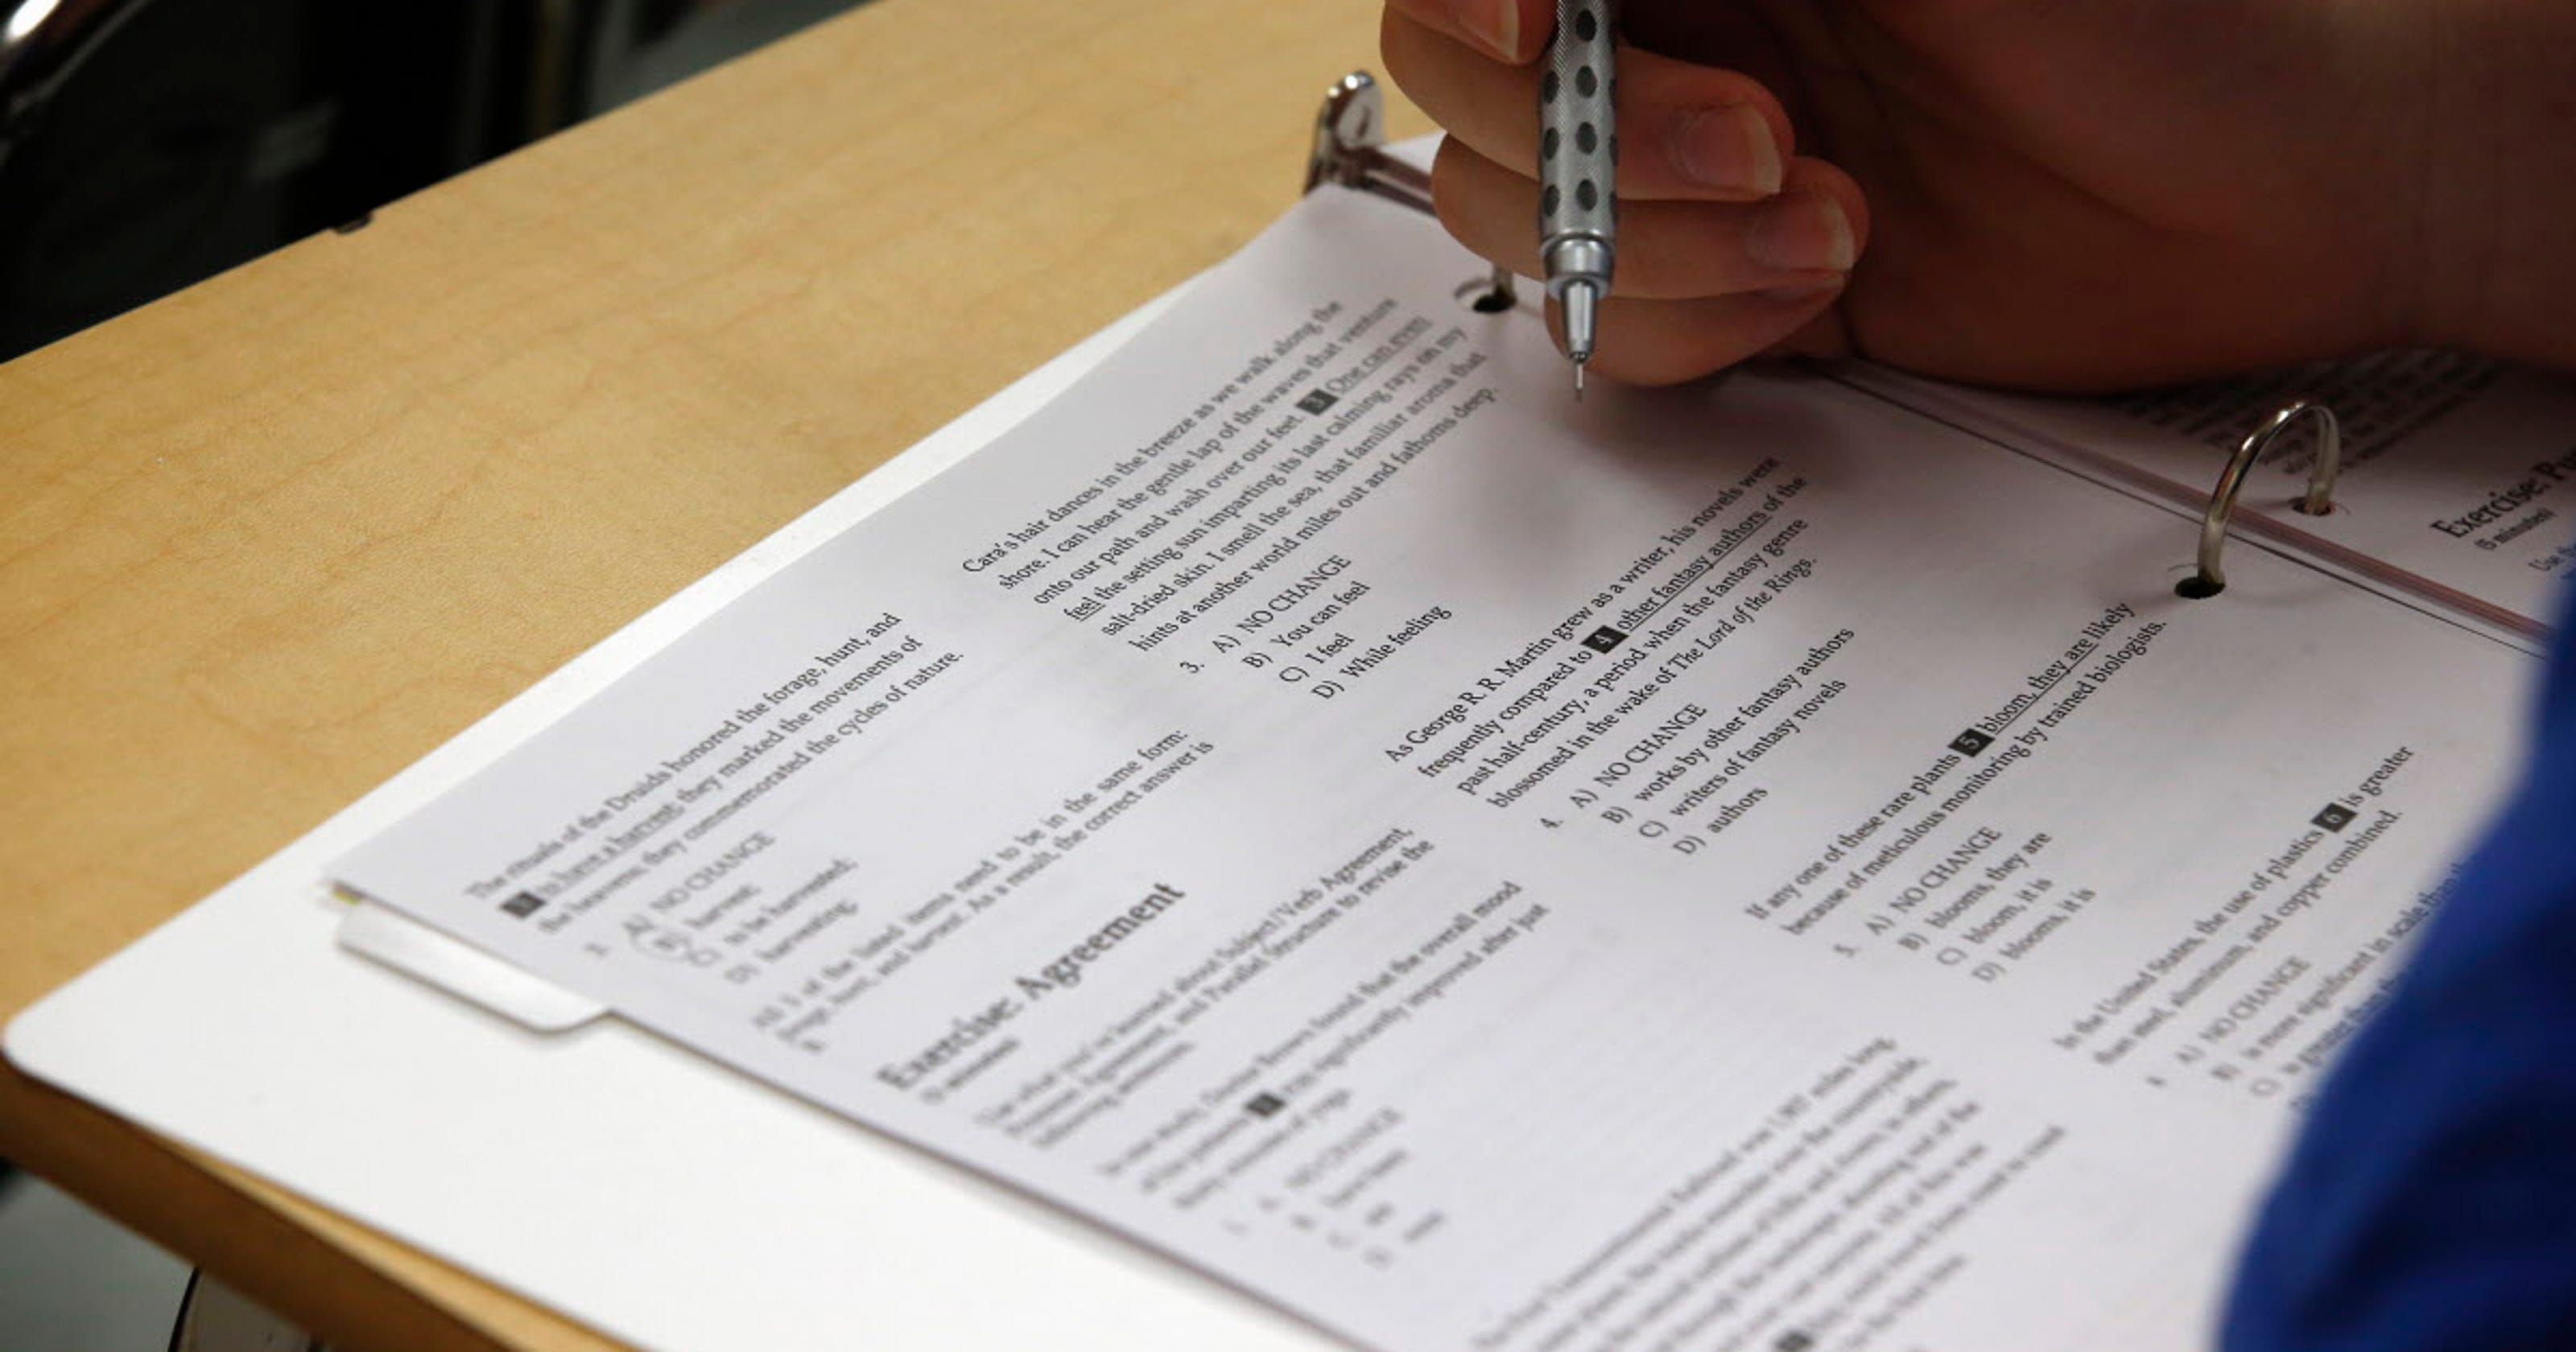 Was August SAT test leaked? Students fret about test's integrity